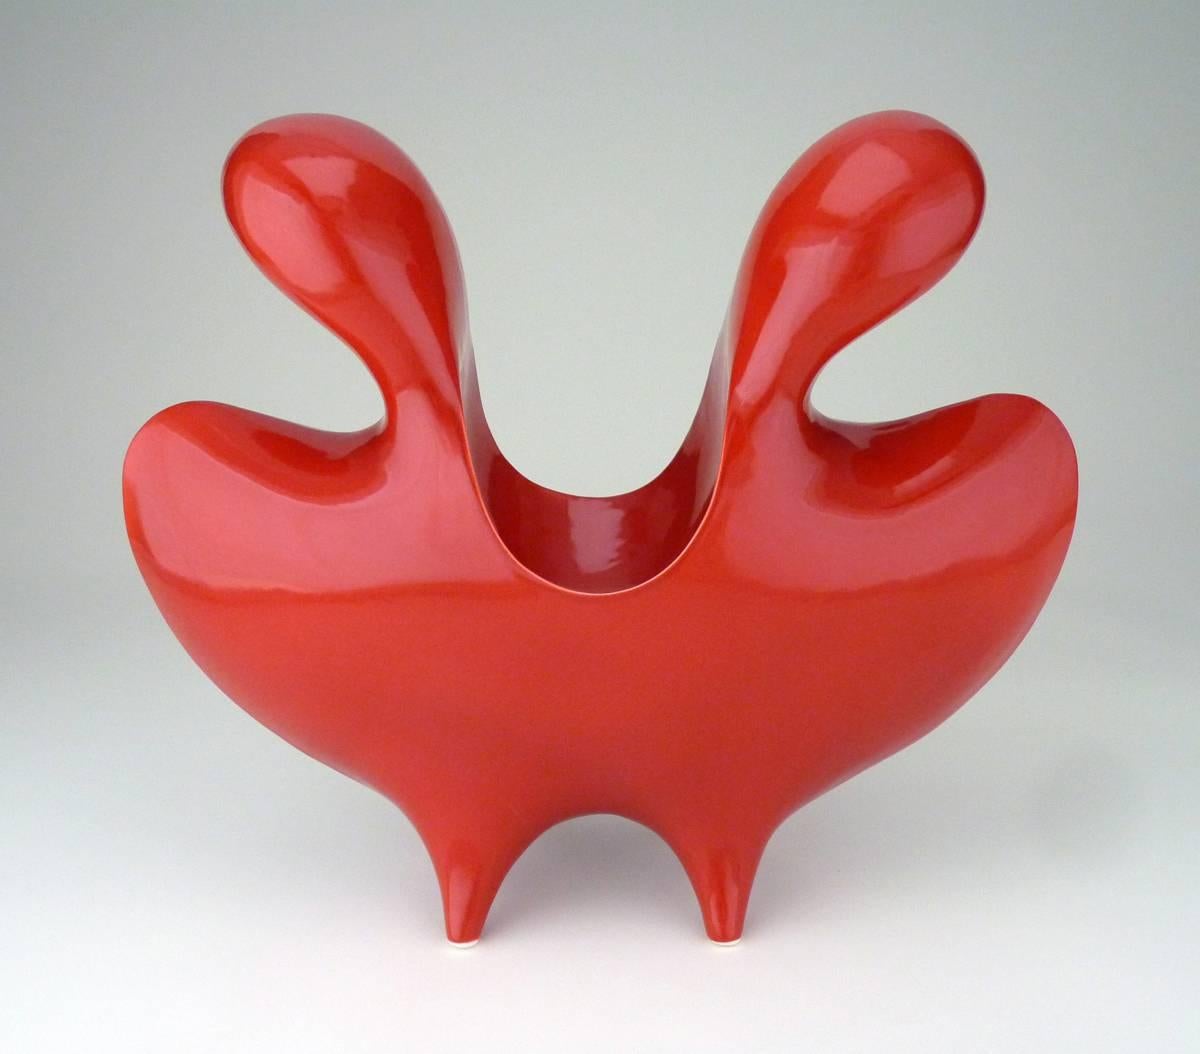 Eric Boos Abstract Sculpture - "Red Splash Bowl"